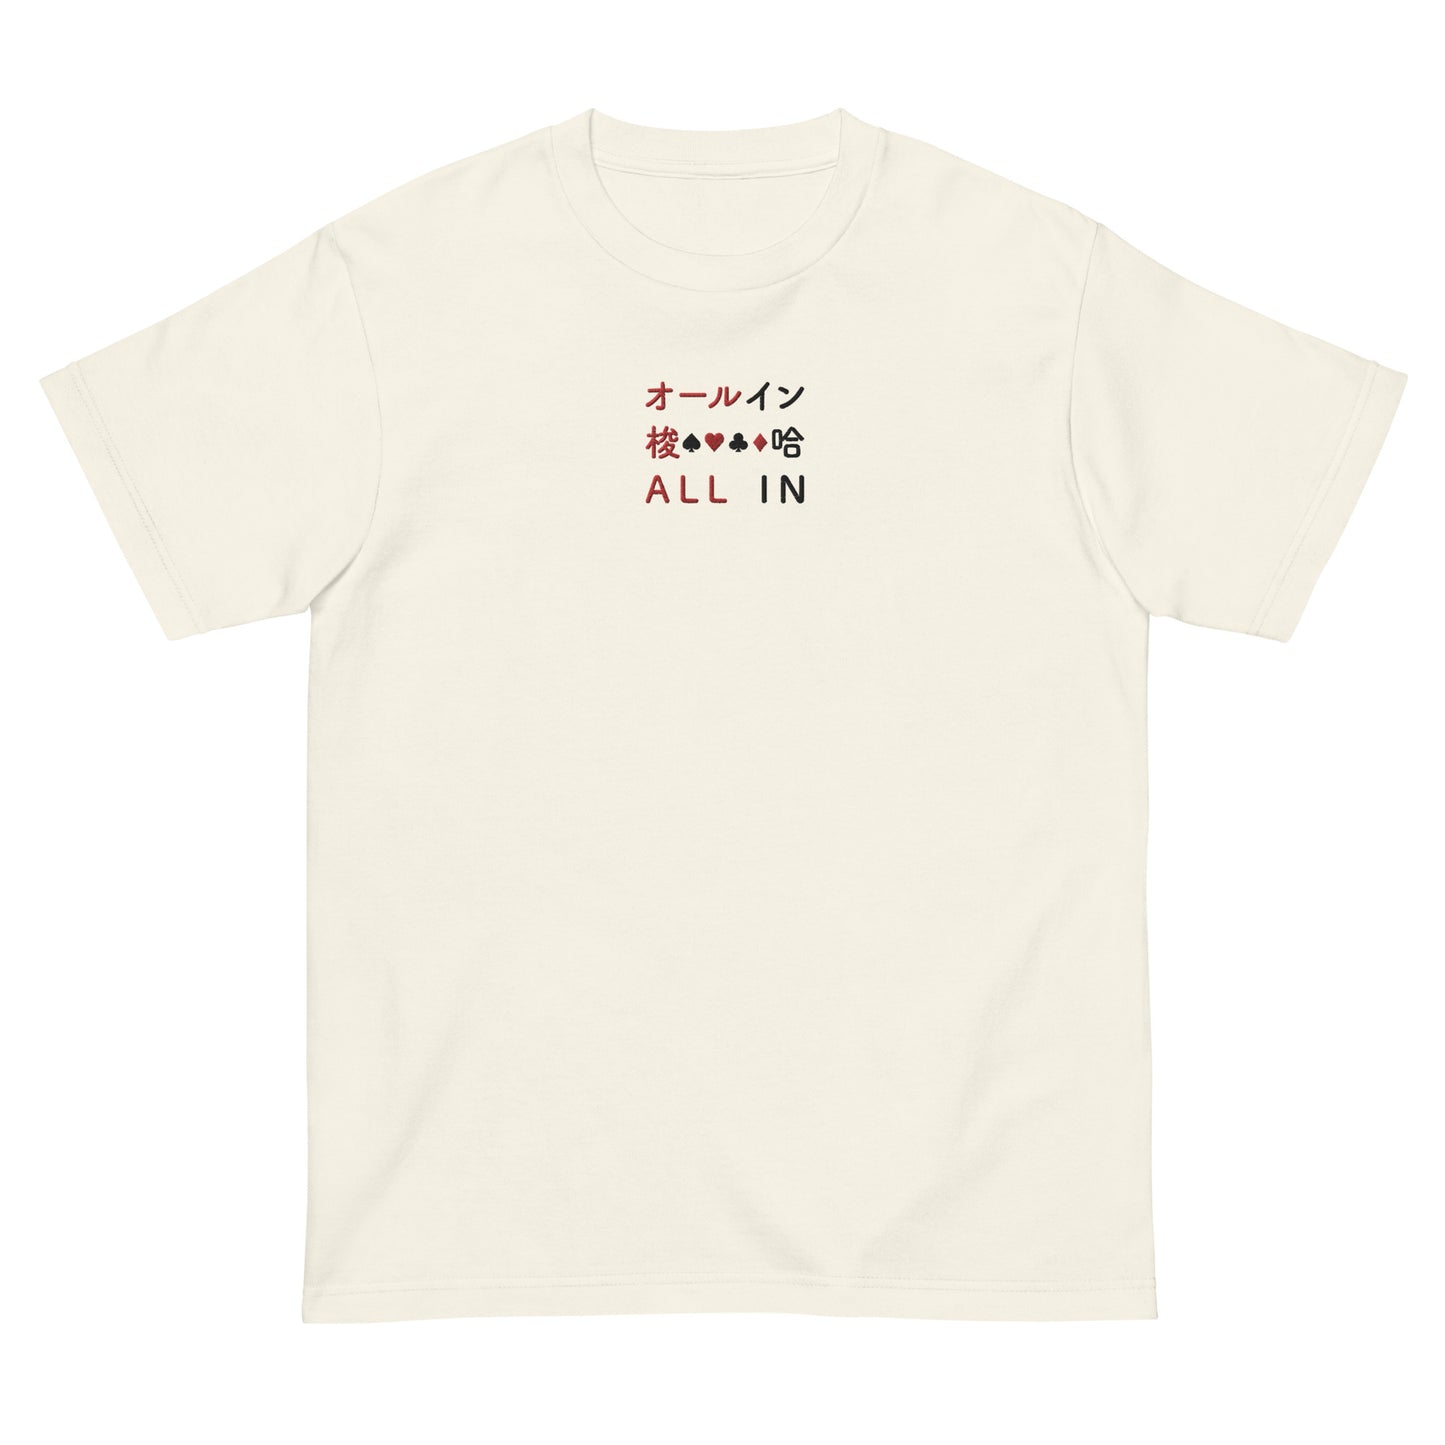 Ivory High Quality Tee - Front Design with an Red, Black Embroidery "All IN" in Japanese,Chinese and English